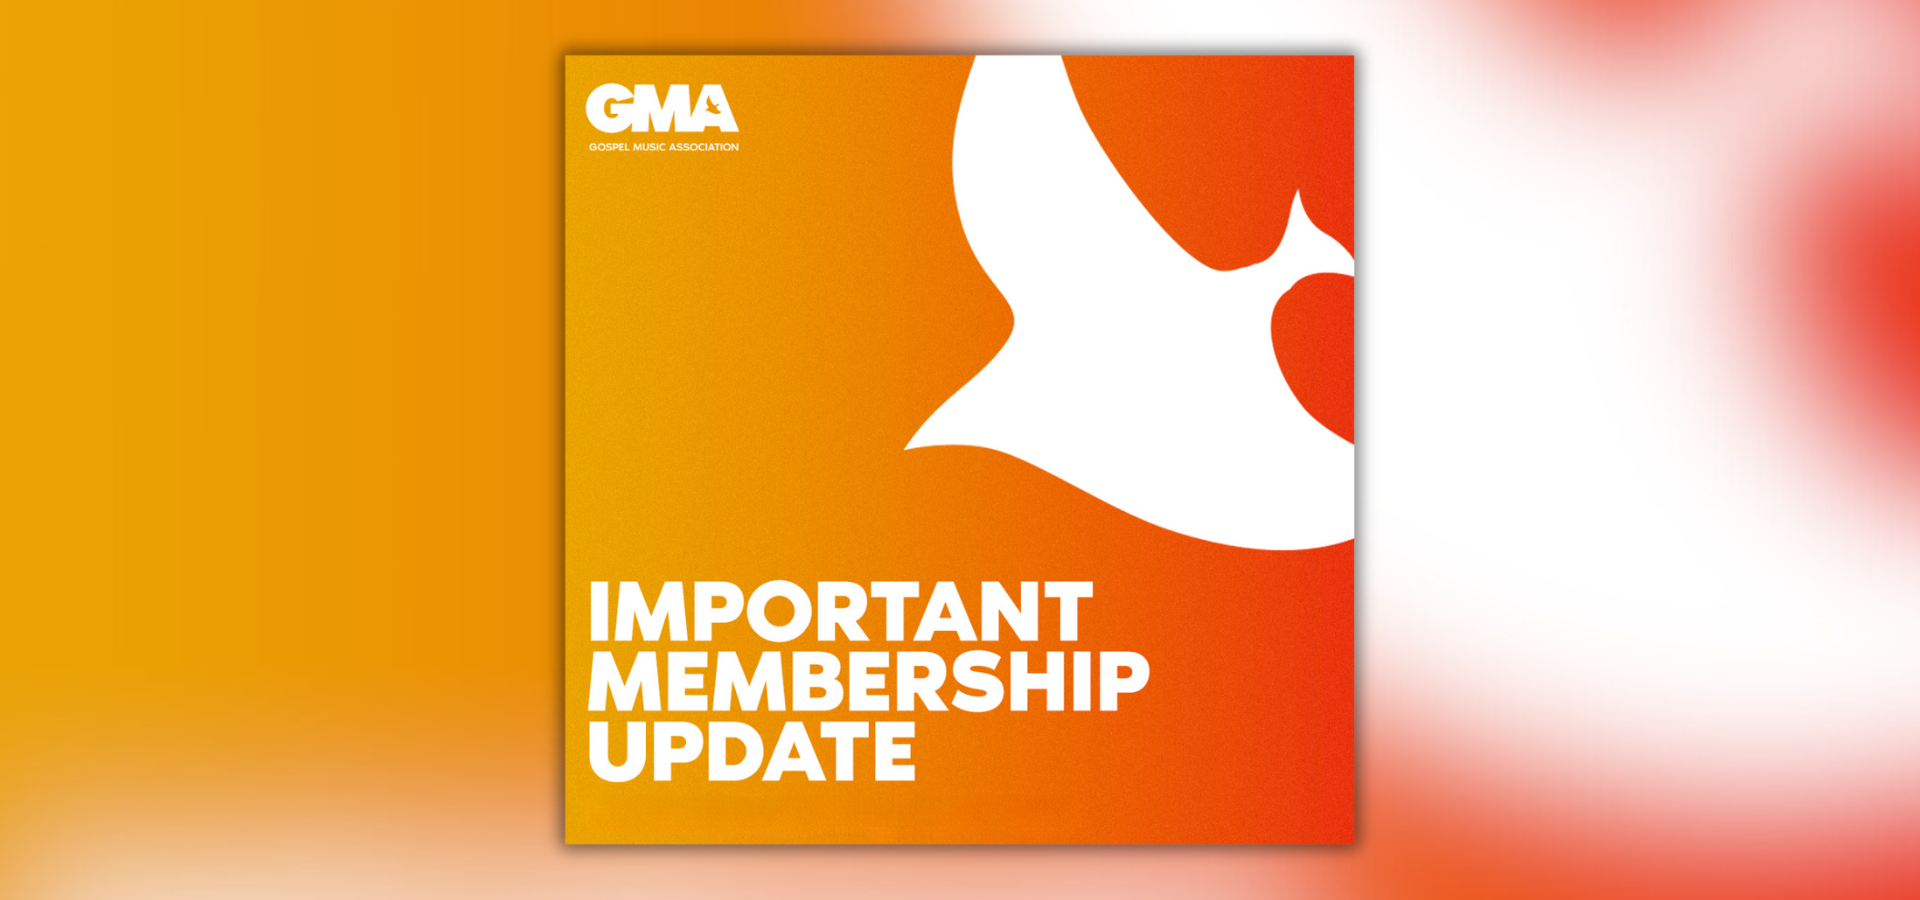 Important Update For GMA Members